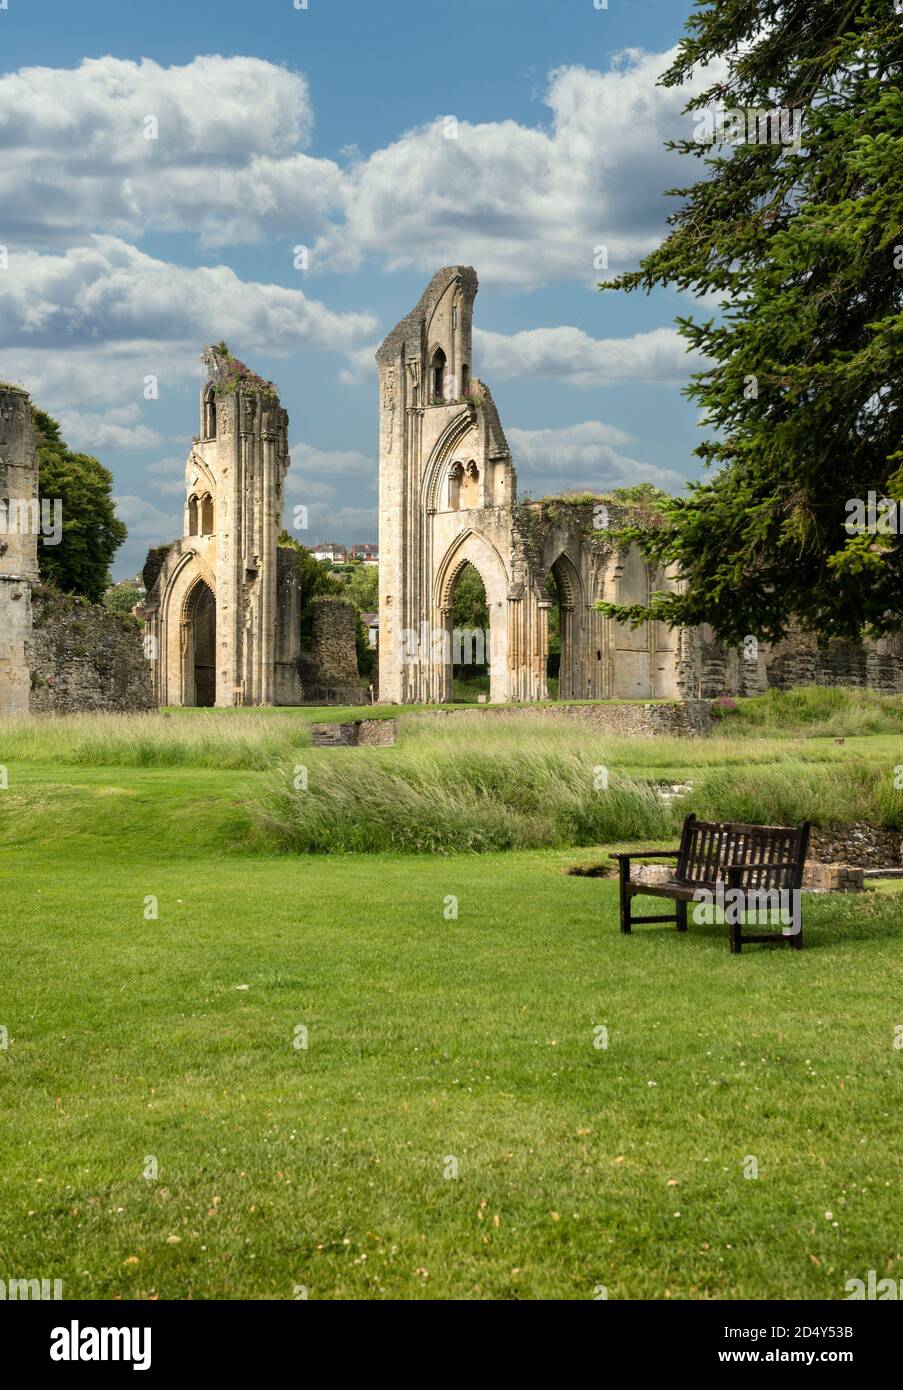 Postcard view of Glastonbury Abbey ruins with green parkland and resting bench in foreground. Blue sky day with white clouds. No people. Copy space. Stock Photo